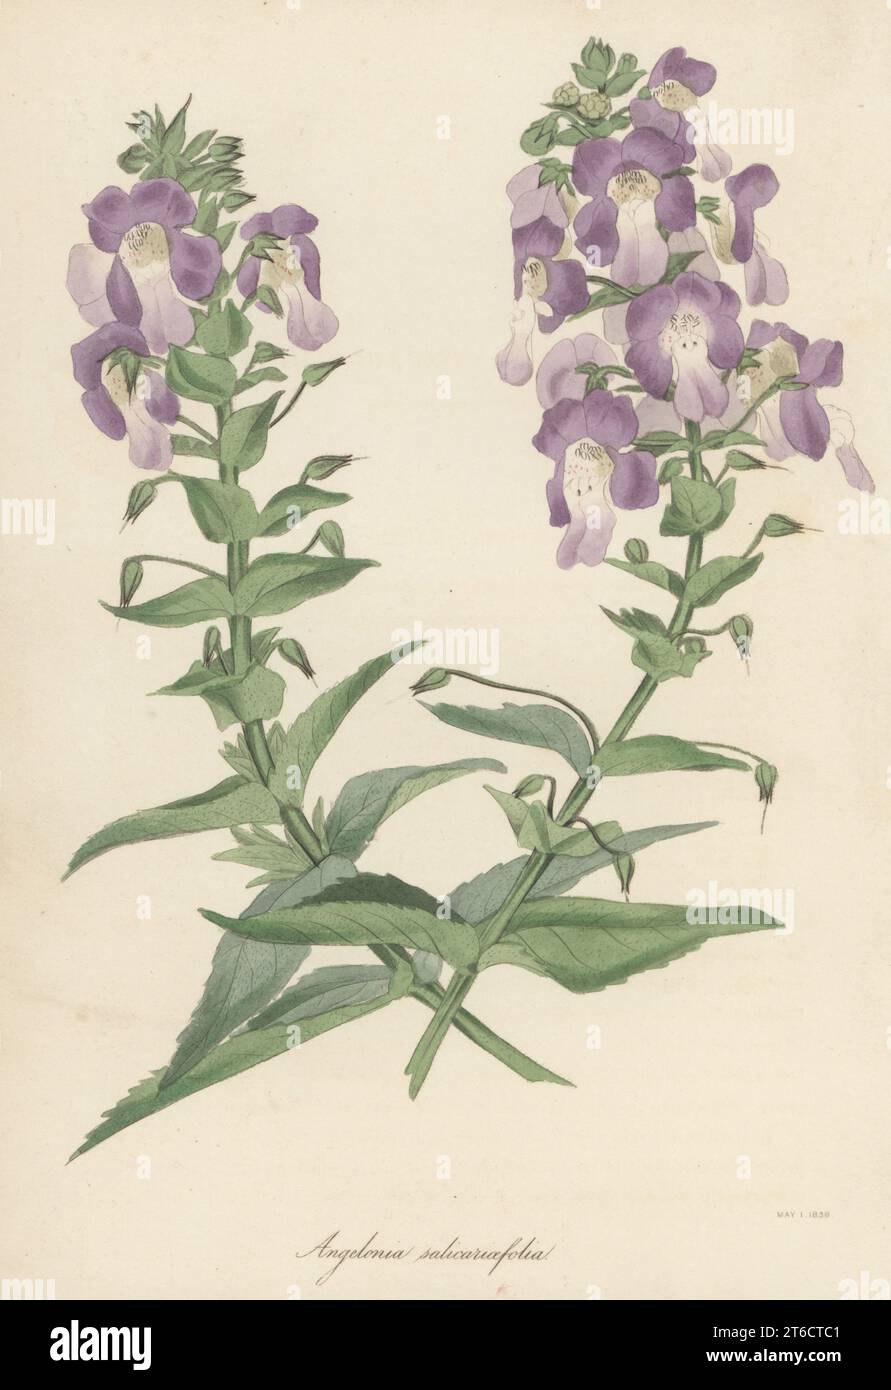 Willowleaf angelonia, Angelonia salicariifolia. Native to South America, introduced from Caracas, flowered at Spofforth, the garden of botanist William Herbert, Dean of Manchester, in 1819. Willow-leaved angelonia, Angelonia salicariaefolia. Handcoloured lithograph from Joseph Paxtons Magazine of Botany, and Register of Flowering Plants, Volume 5, Orr and Smith, London, 1838. Stock Photo